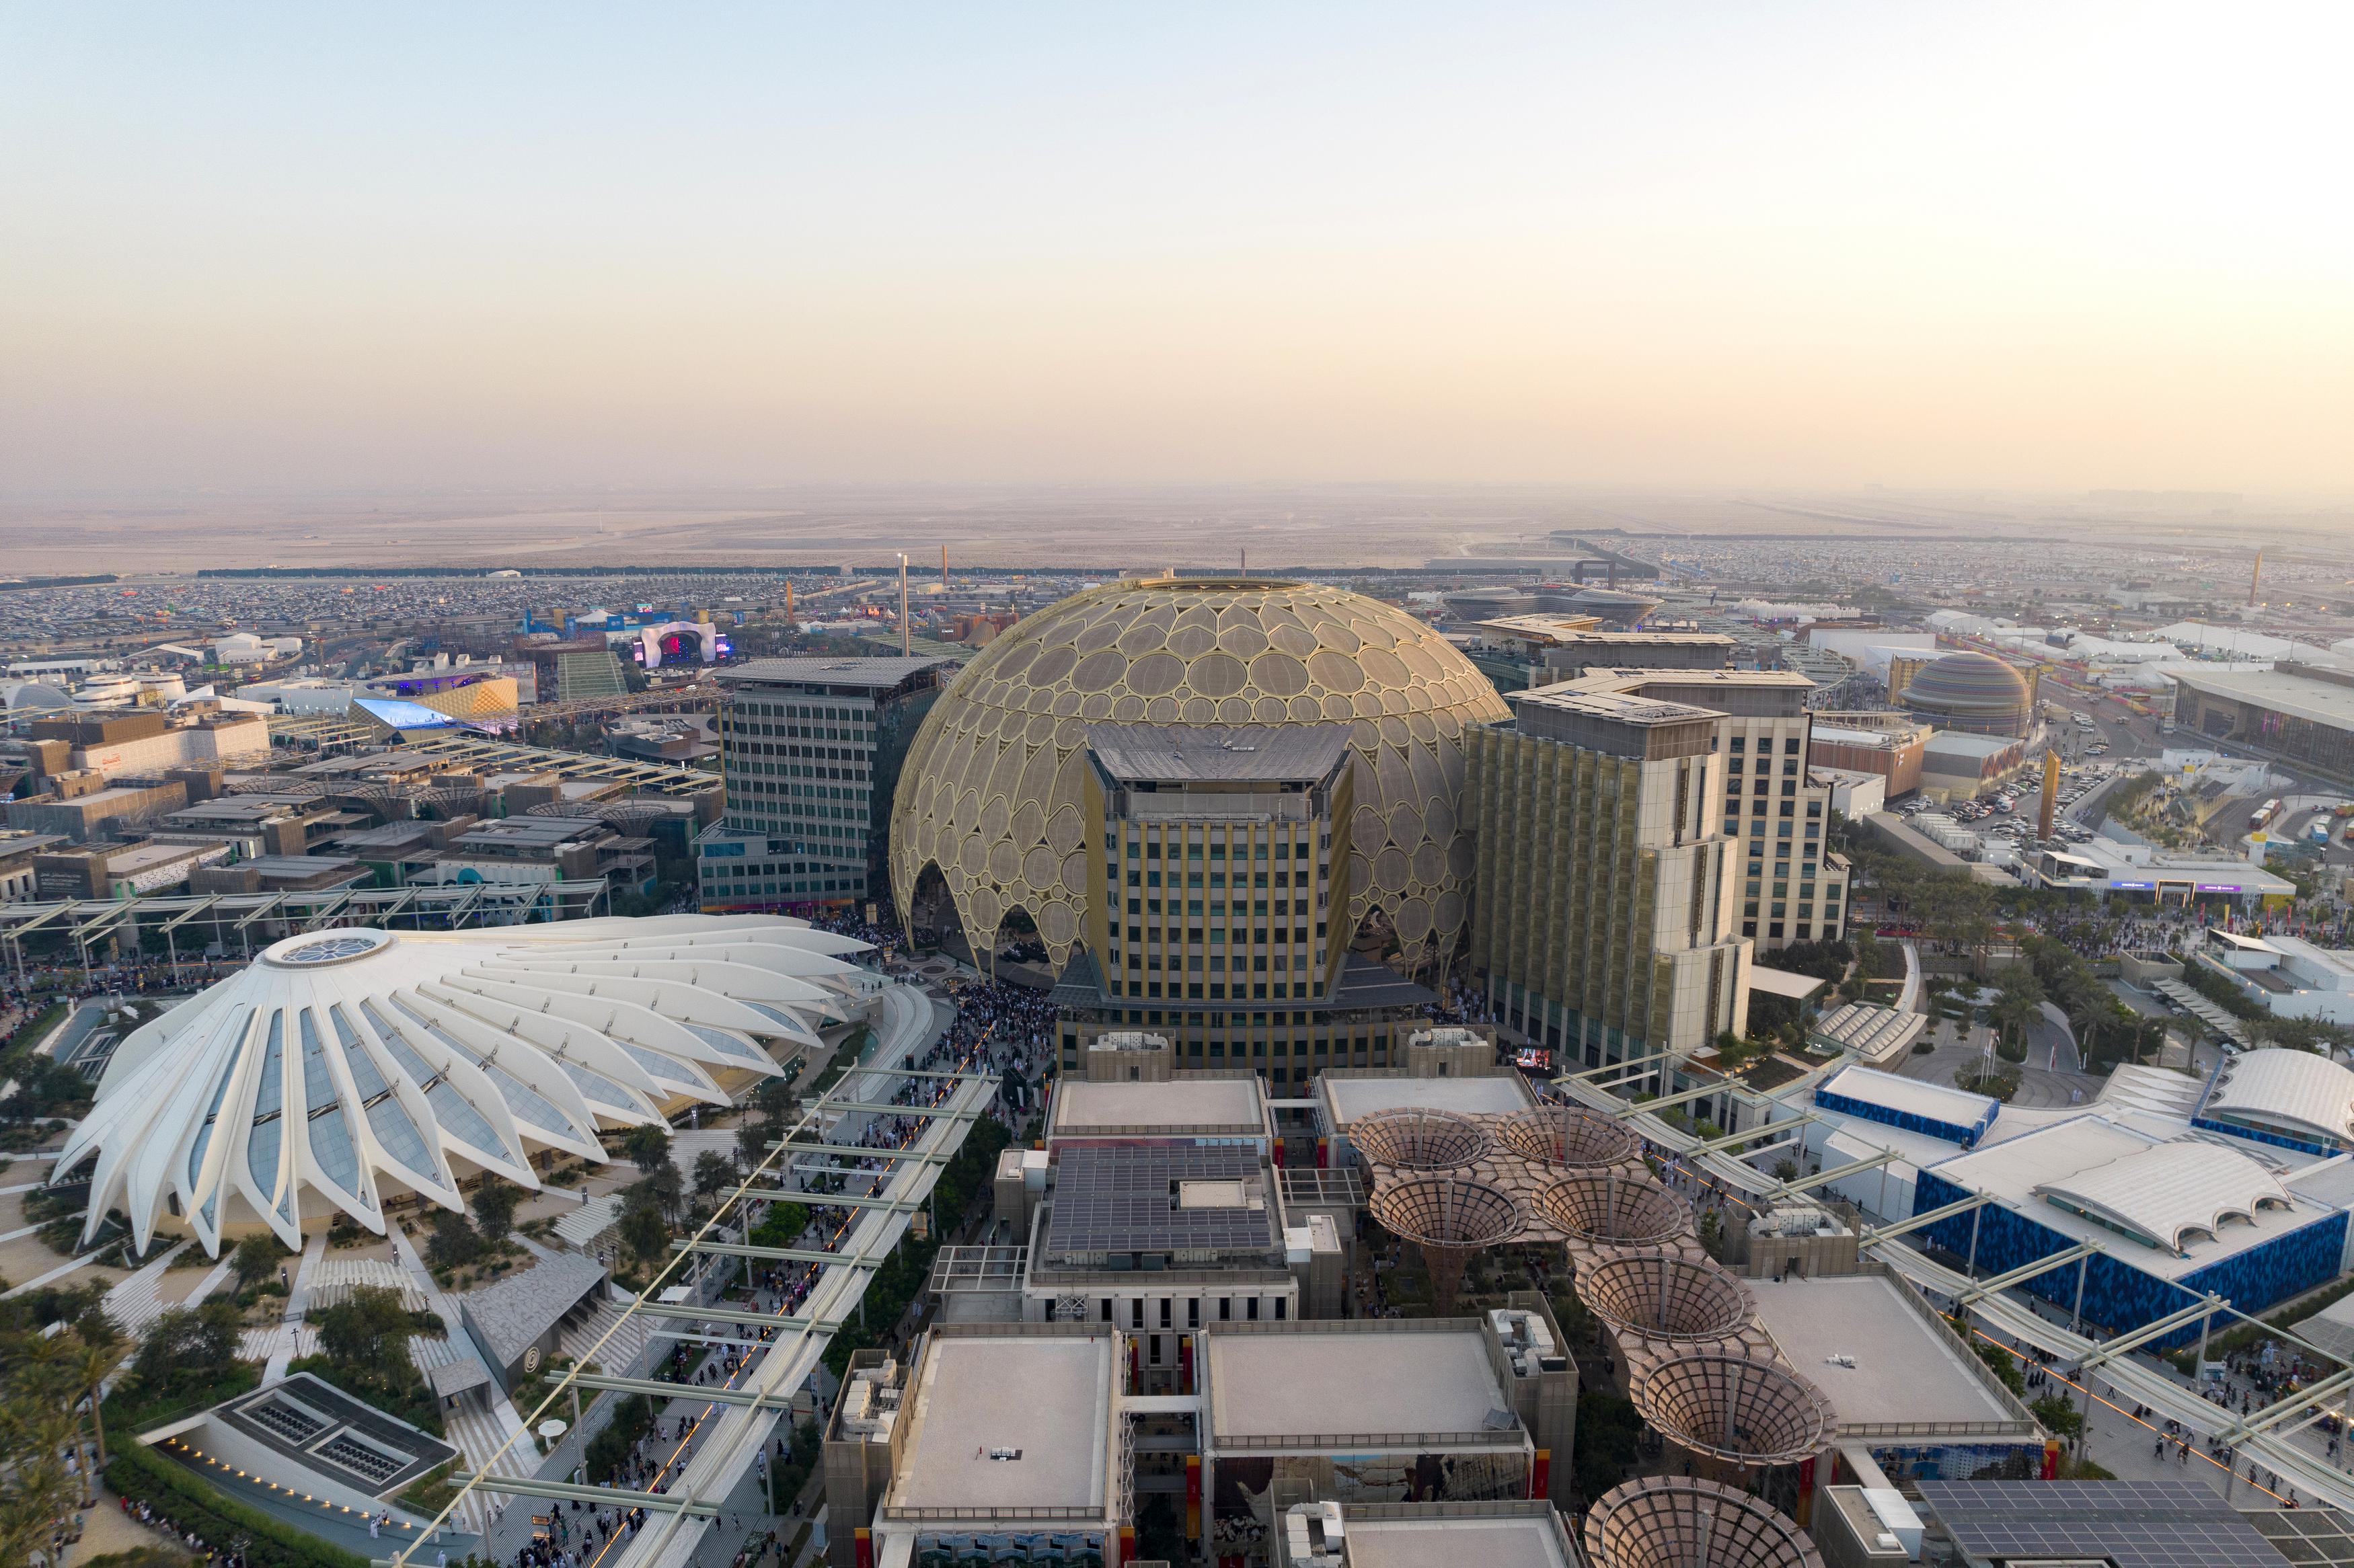 UNTOLD, Dubai’s First MegaFestival, Unveils Its Grand Debut At Expo